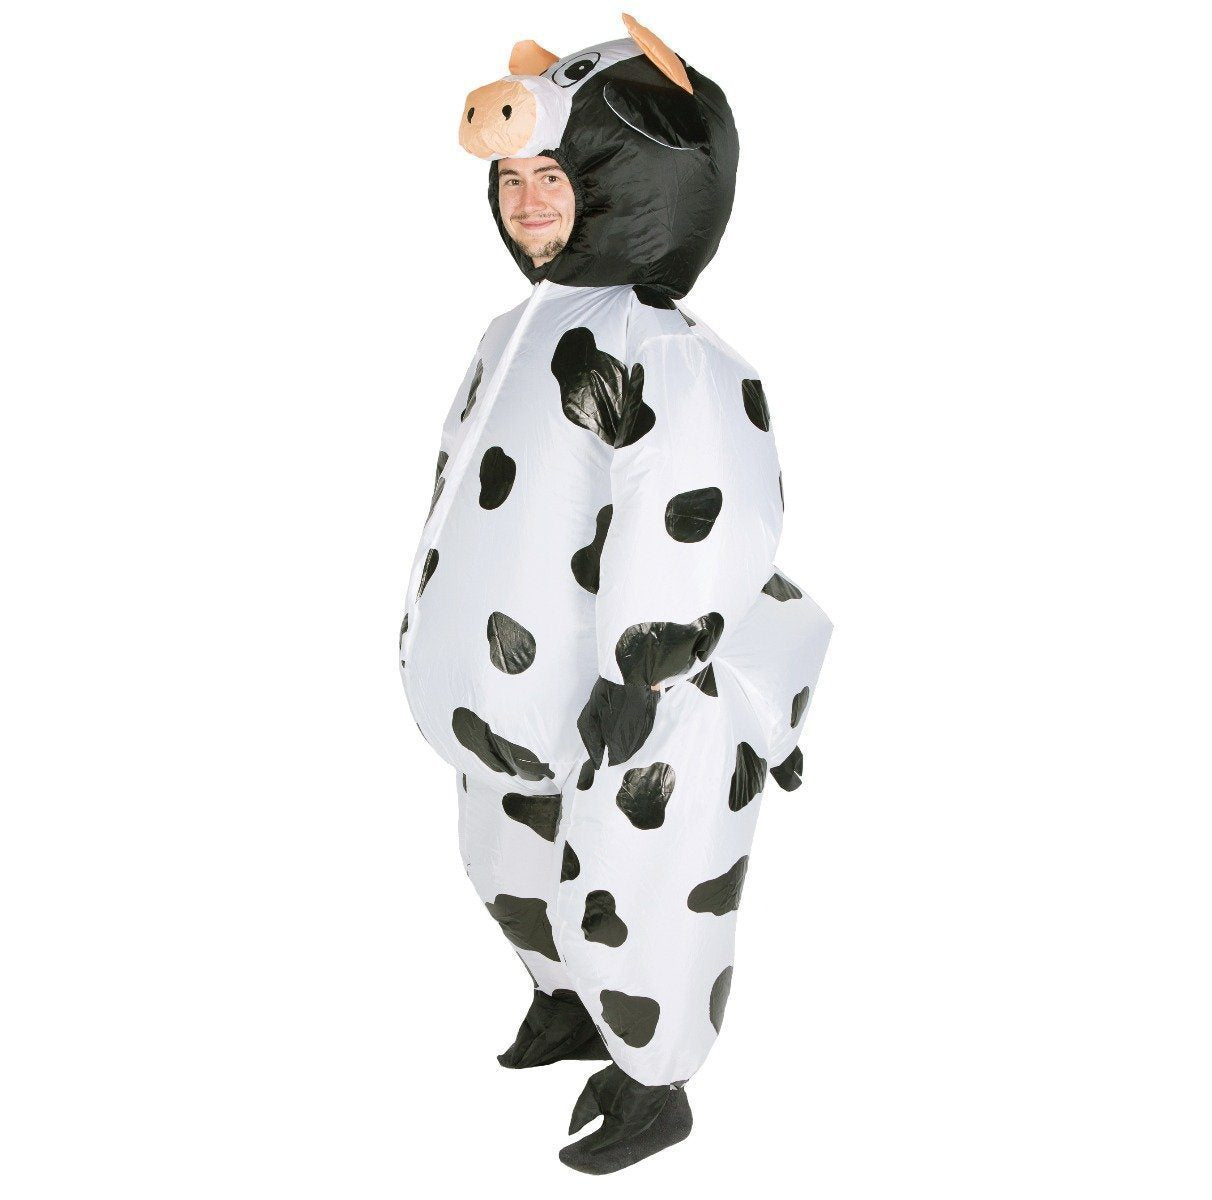 Fancy Dress - Inflatable Cow Costume